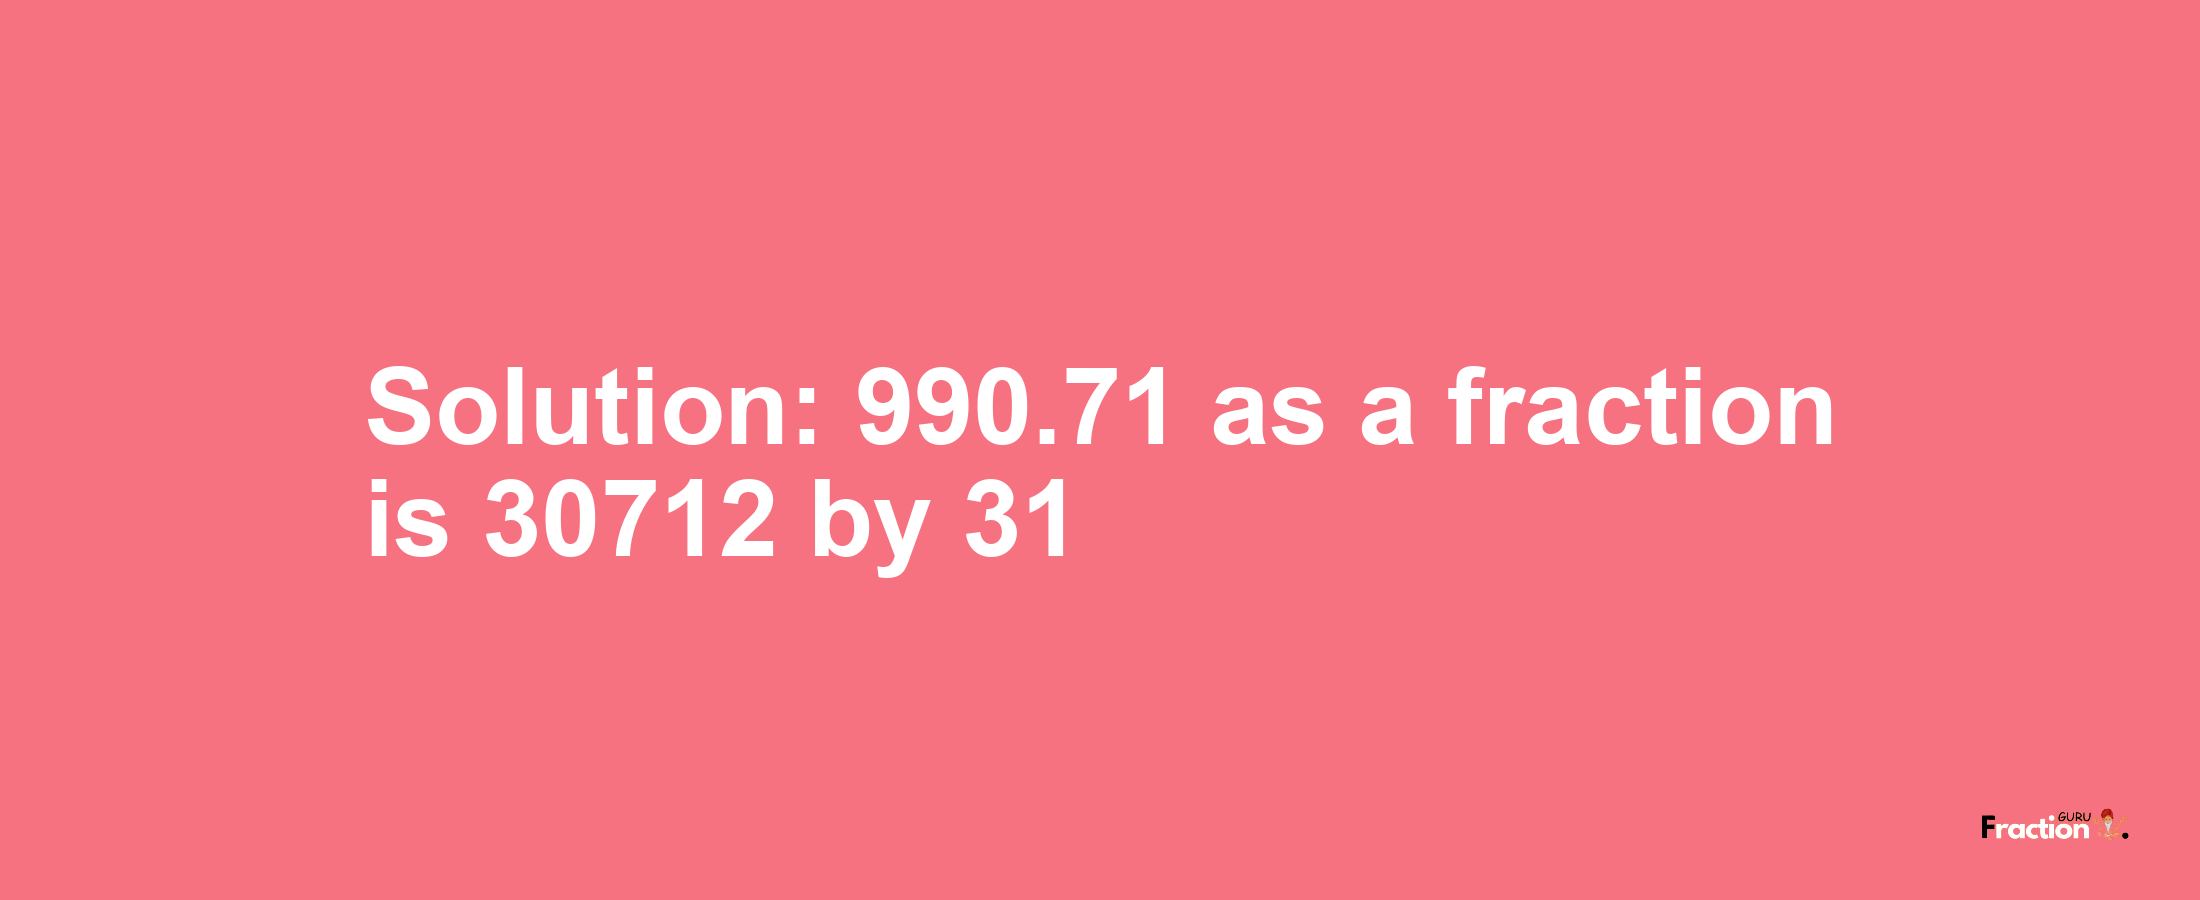 Solution:990.71 as a fraction is 30712/31